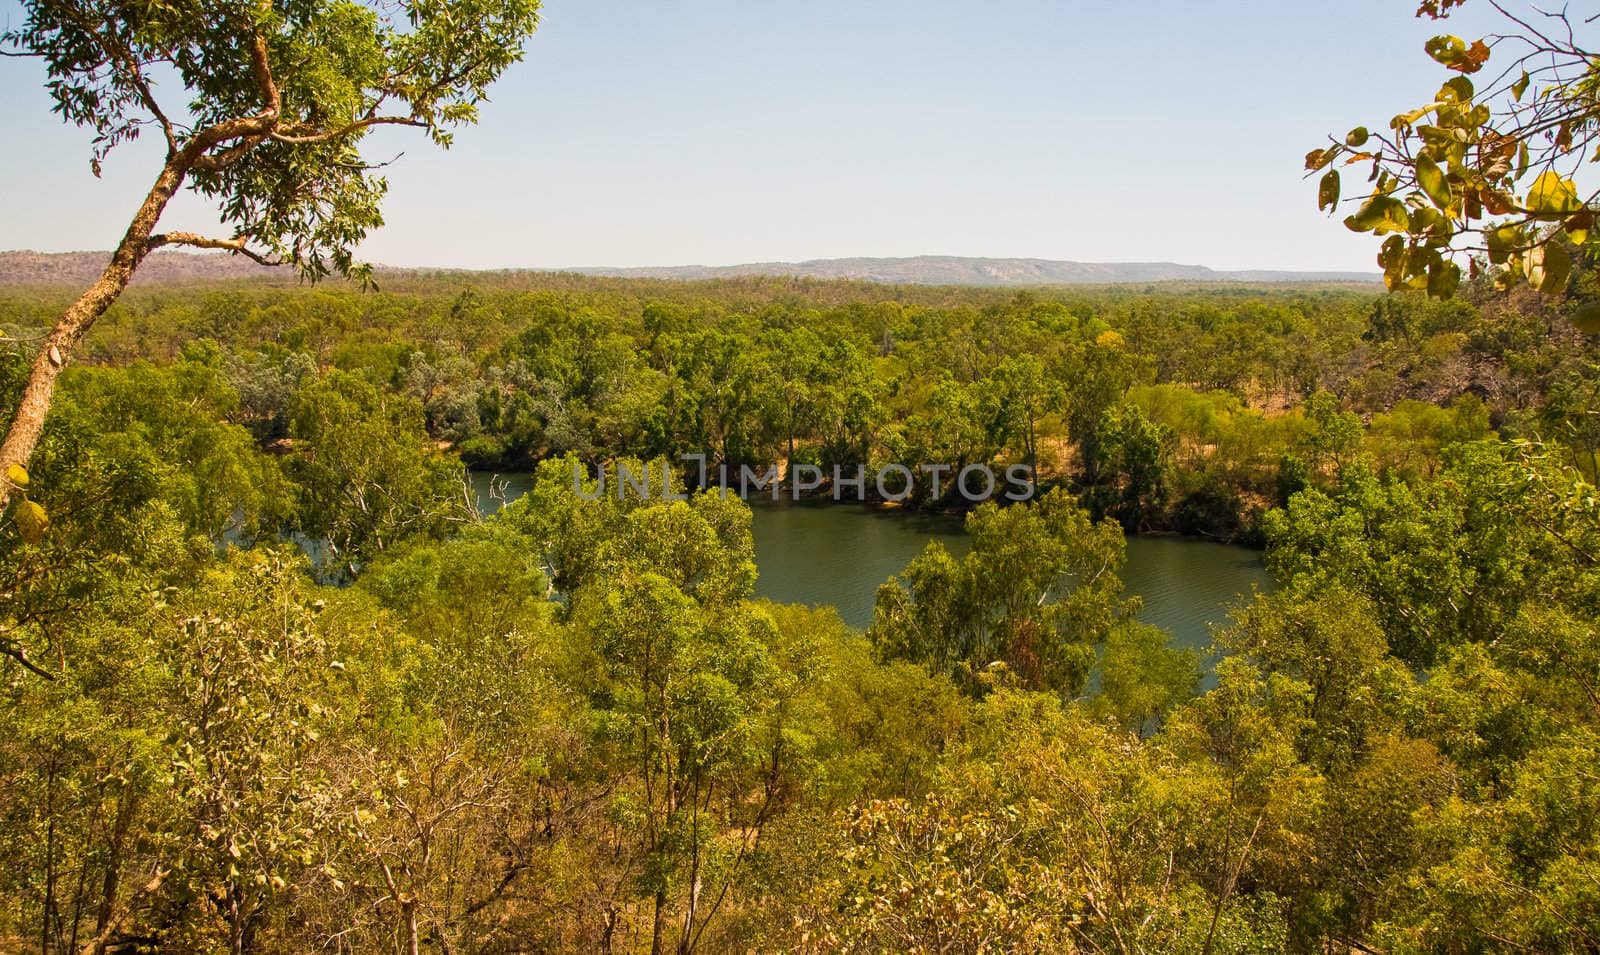 the view and the beauty of Katherin Gorge, australia 